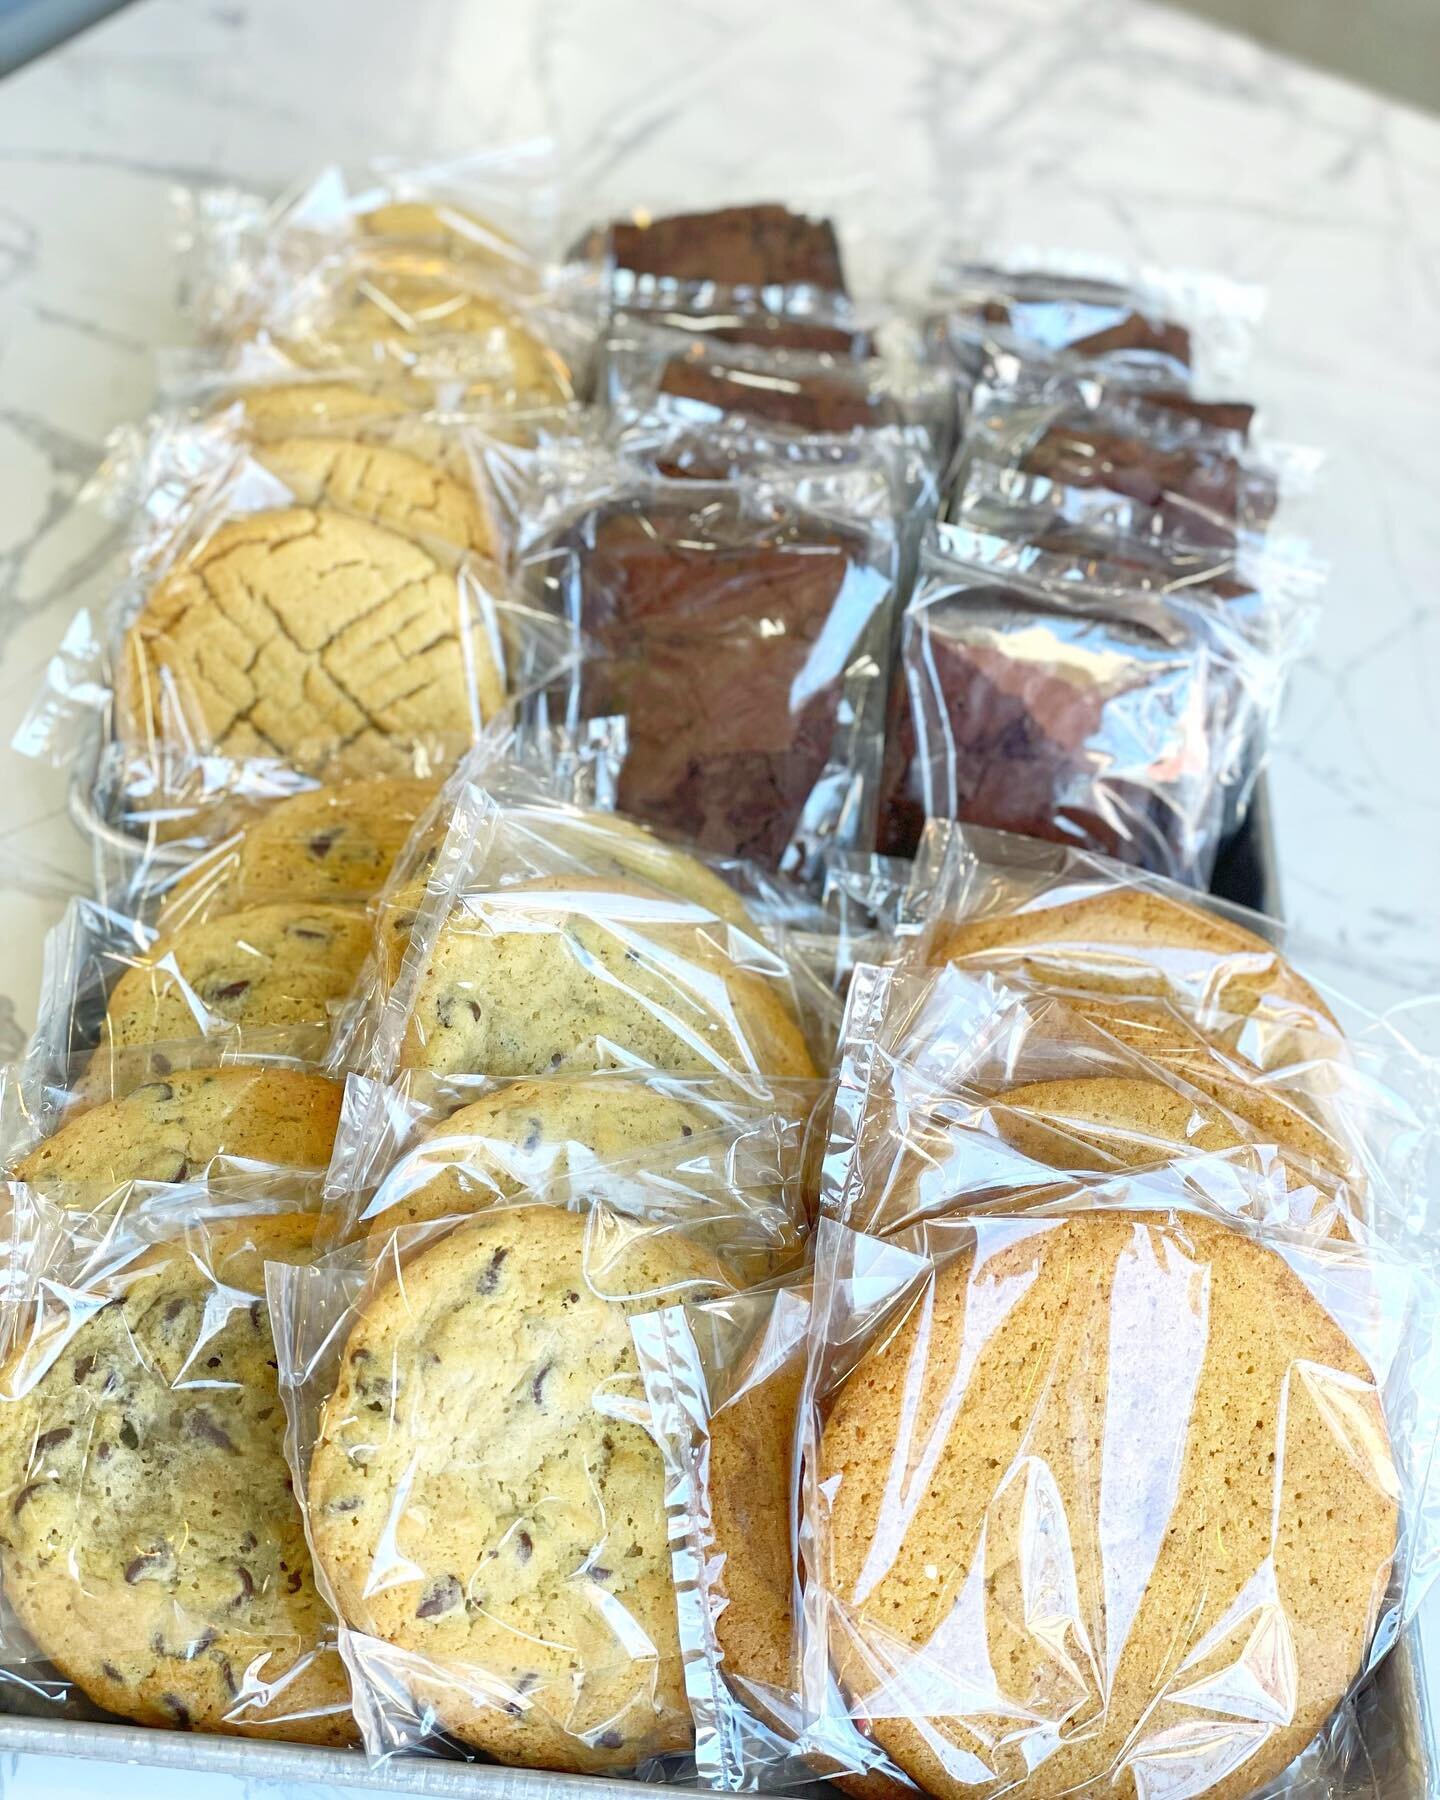 If you're looking for a sweet and delicious treat in the Calera area, look no further than our bakery &amp; ice cream shop! Our scratch-made cookies are baked fresh daily, and we offer a variety of irresistible flavors, including peanut butter, brown